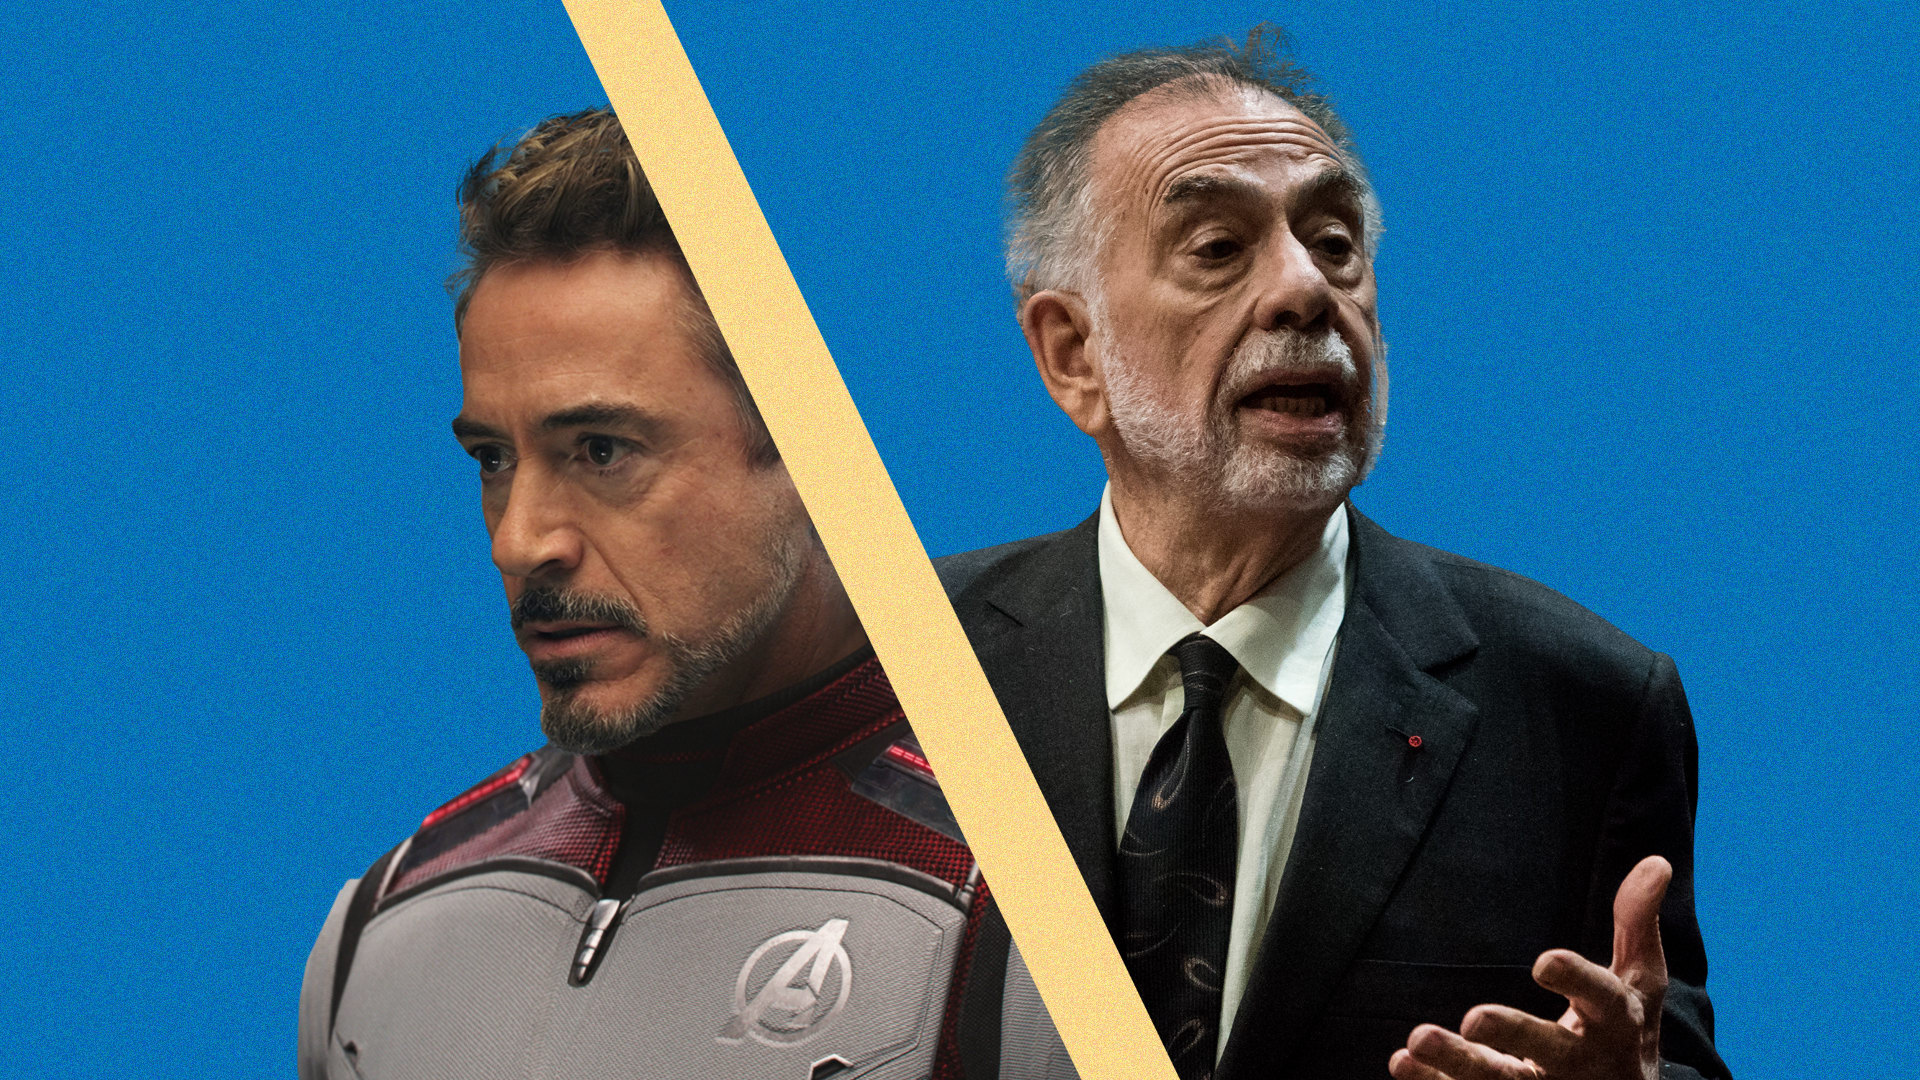 Francis Ford Coppola hates on Marvel, calling MCU movies ‘despicable’